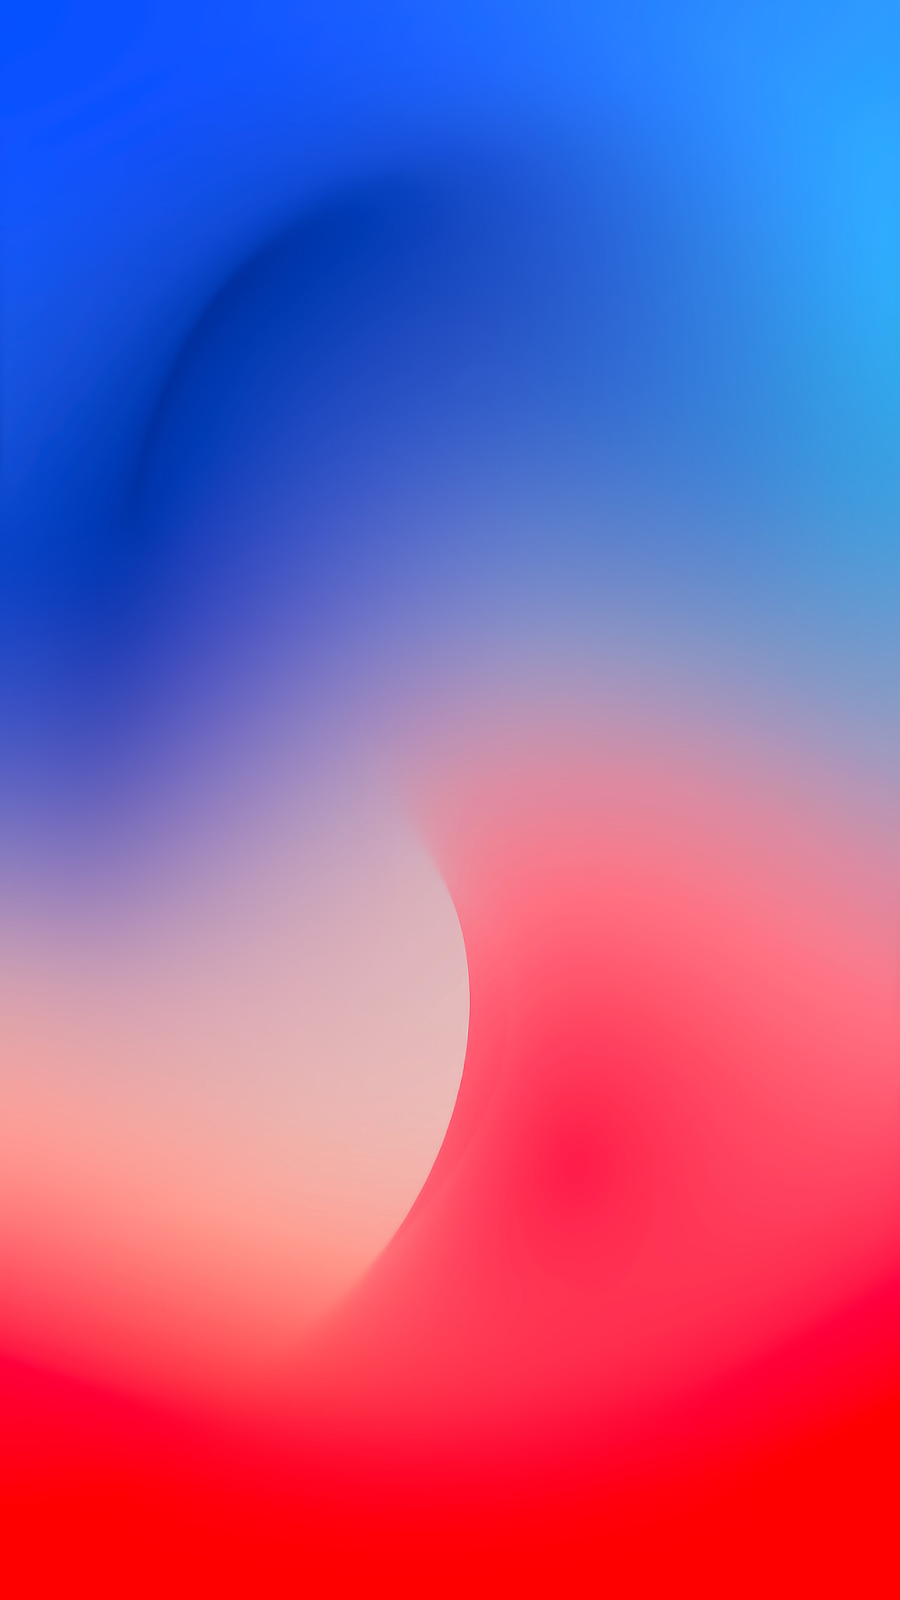 Fluid Blue and Red by AR72014